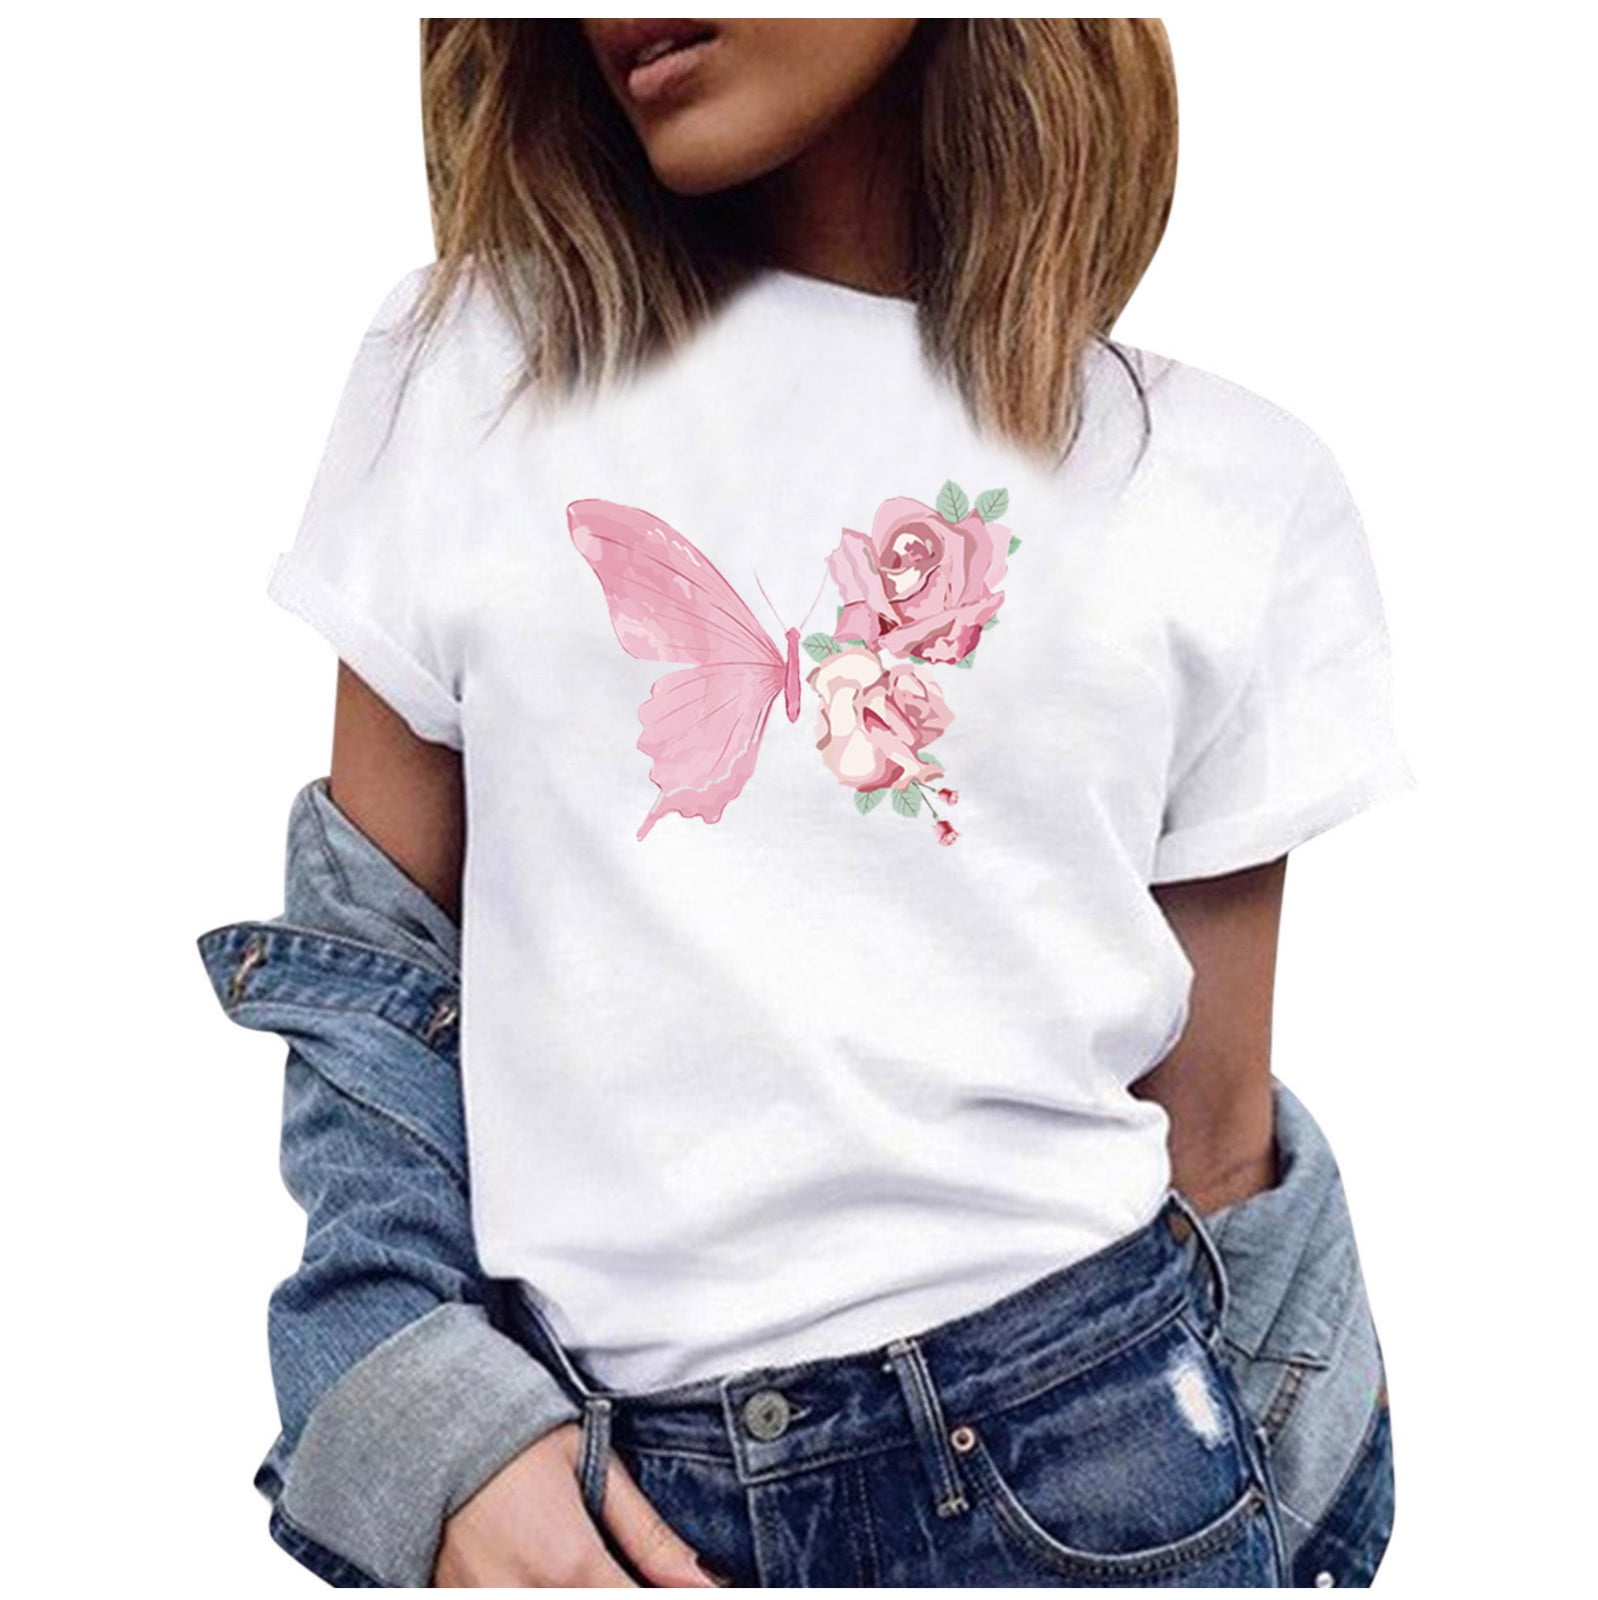 Chicks and Pink Roses   Denim with Matching Tshirt    Sizes 